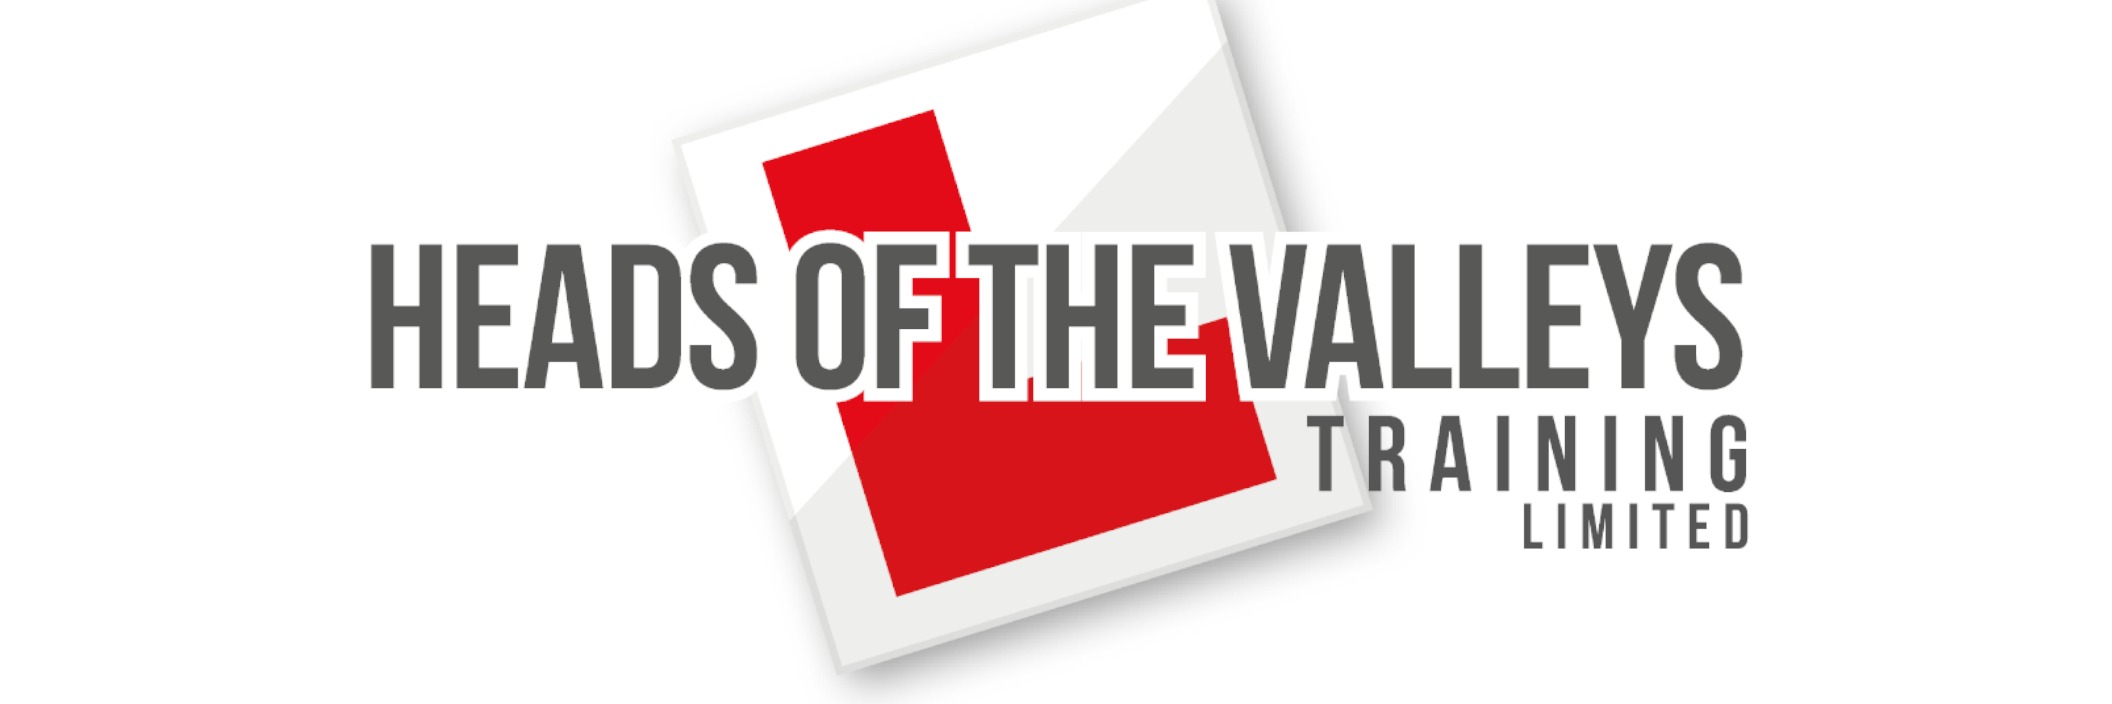 heads of the valley training joins logistics skills network